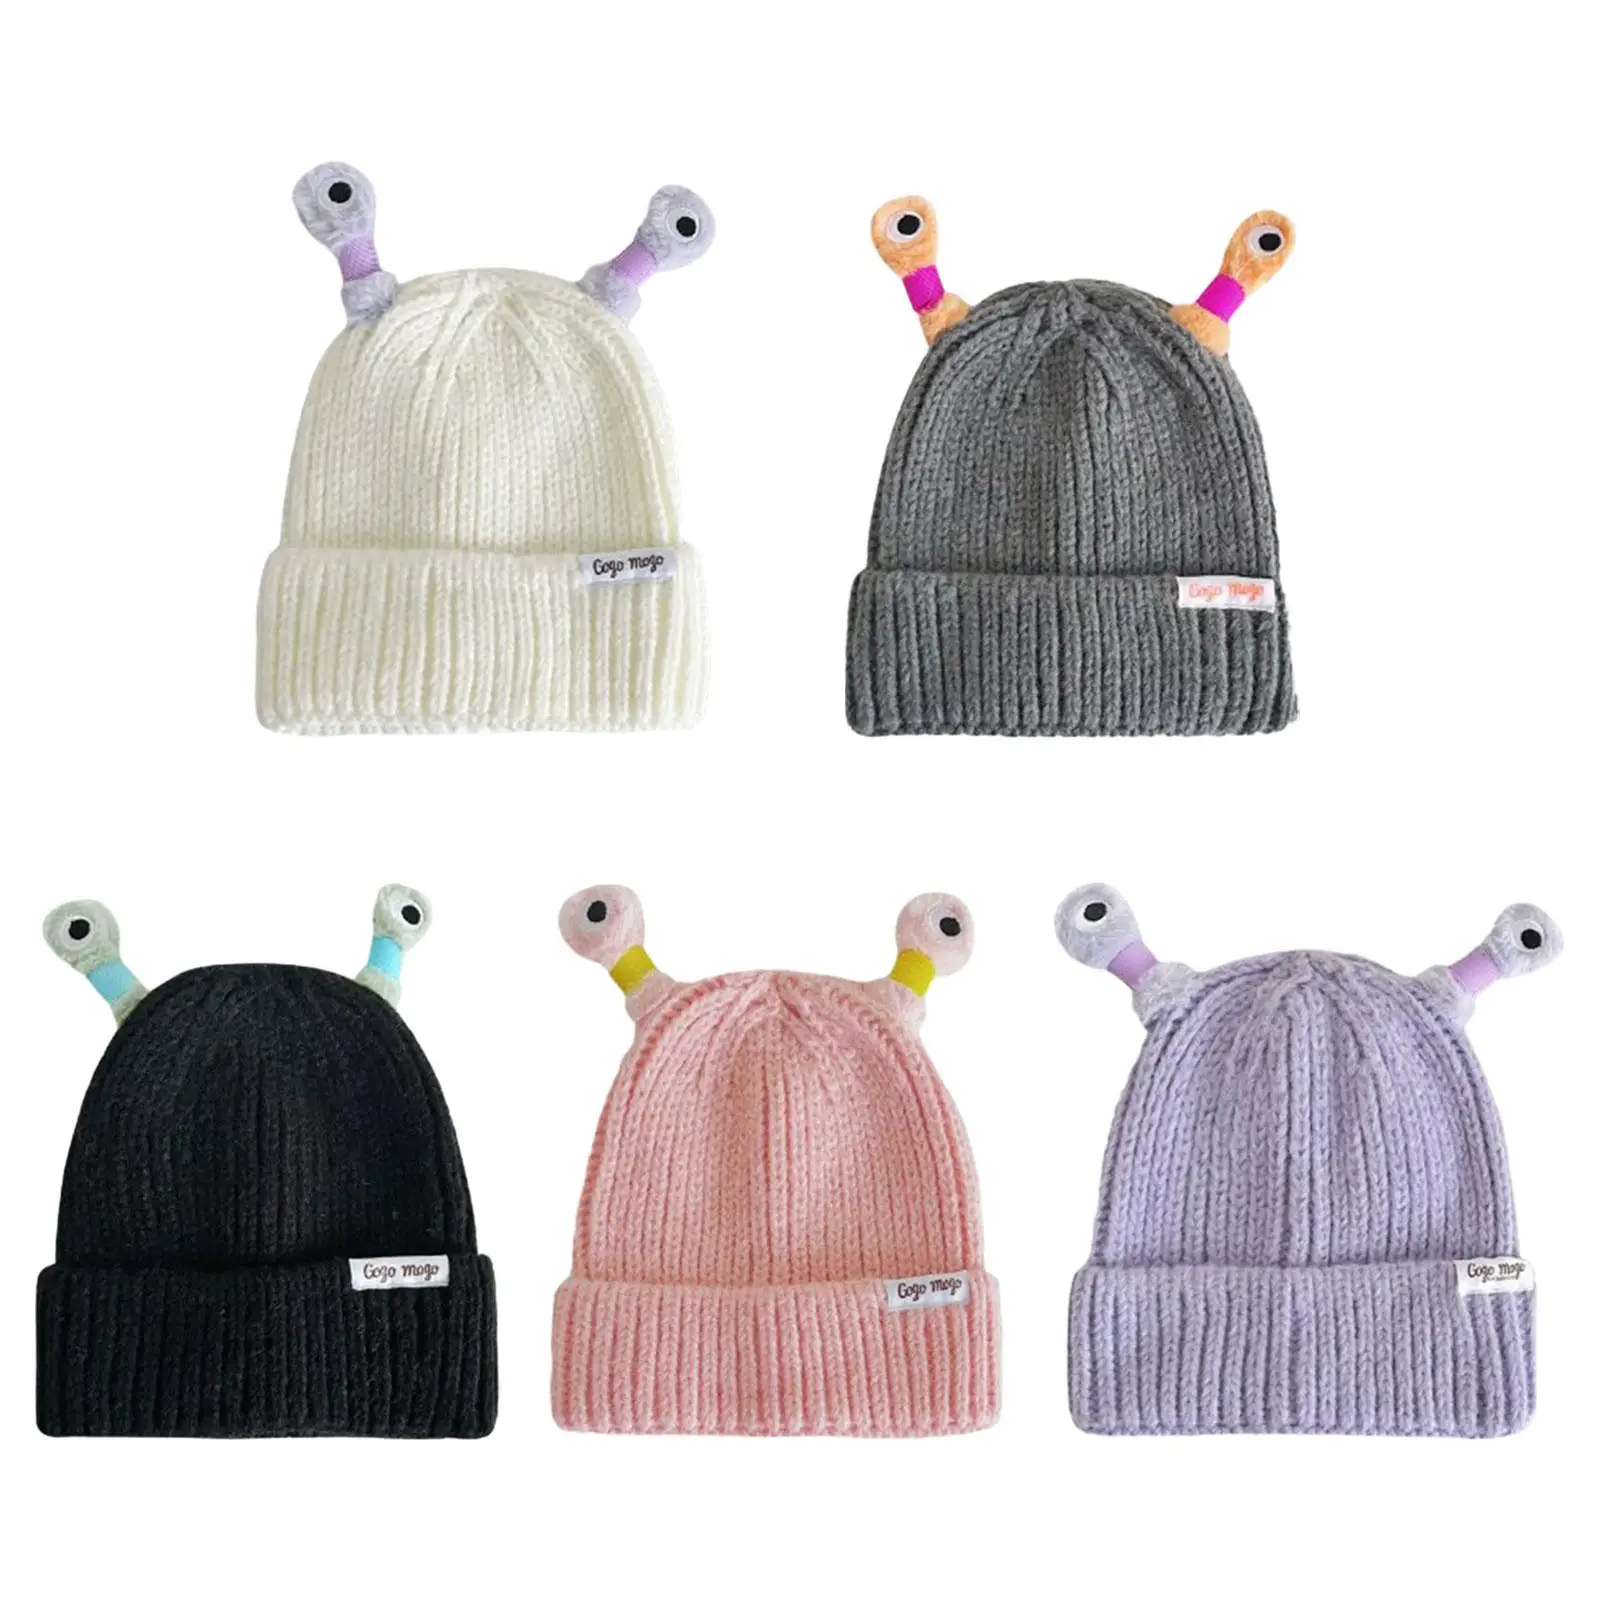 

Glowing Little Monster Knit Hat Cute Soft Girls and Boys Warm Knitted Hat for Skating Climbing Street Themed Party Backpacking